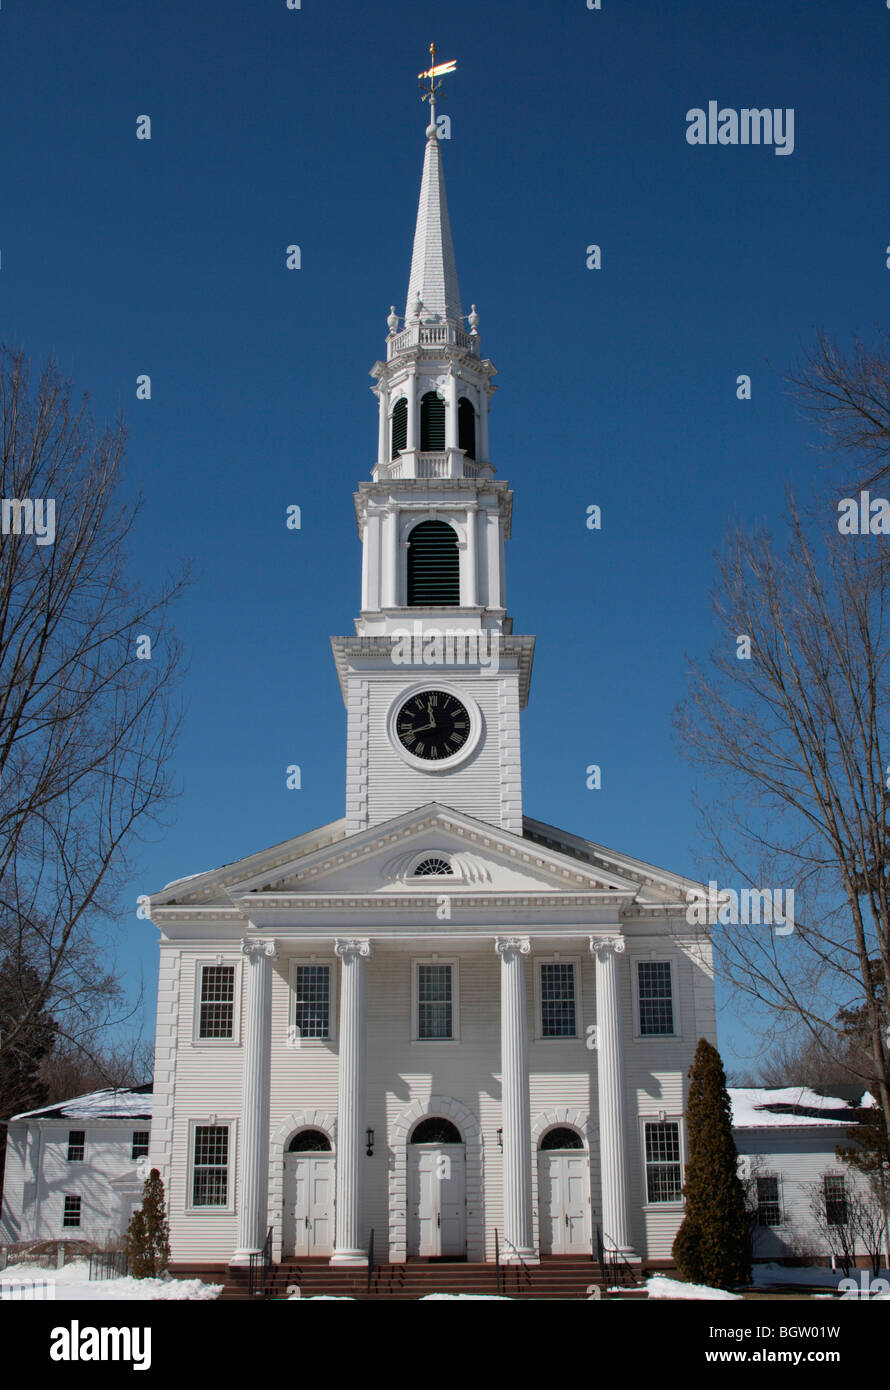 Old Lyme Connecticut USA First Congregational church typical New England white clapboard  built 1817 architect Samuel Belcher Stock Photo